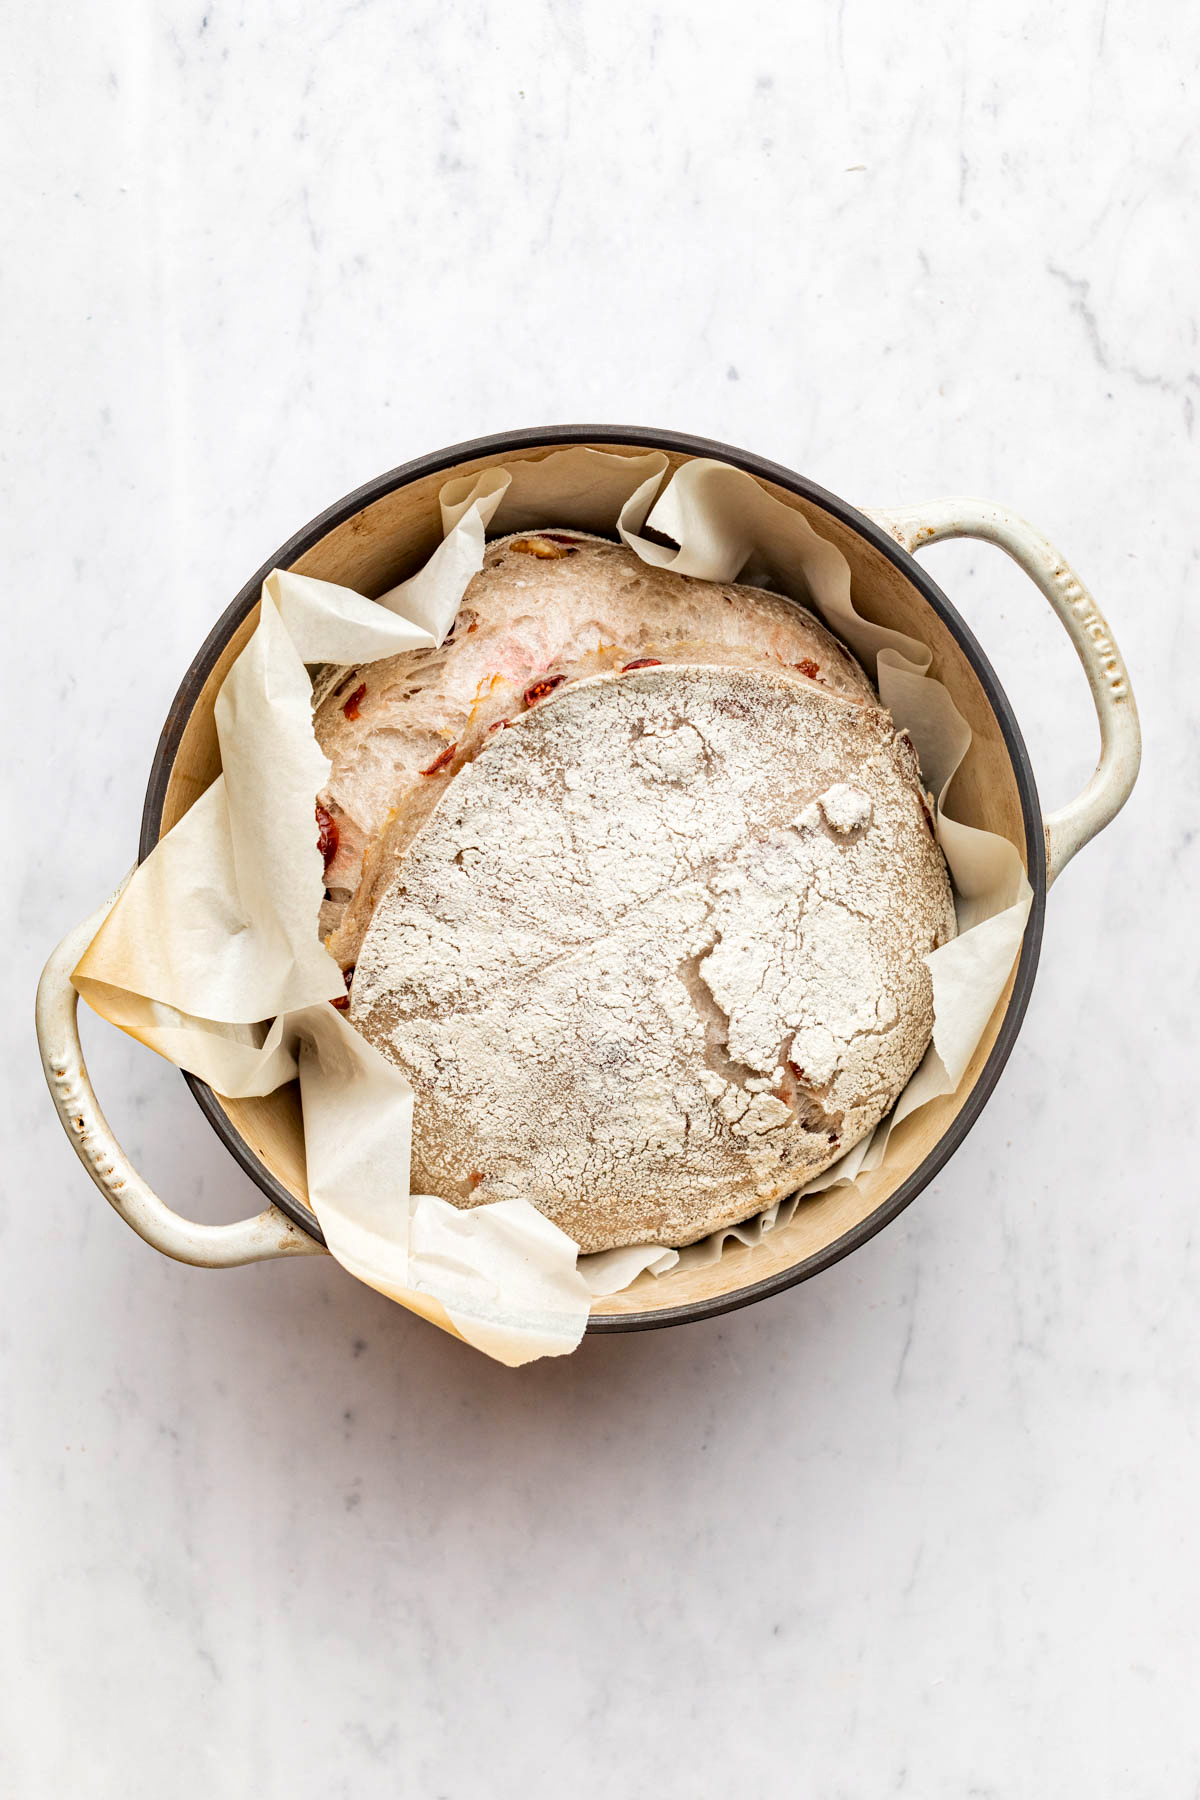 Partially baked bread in a pot.